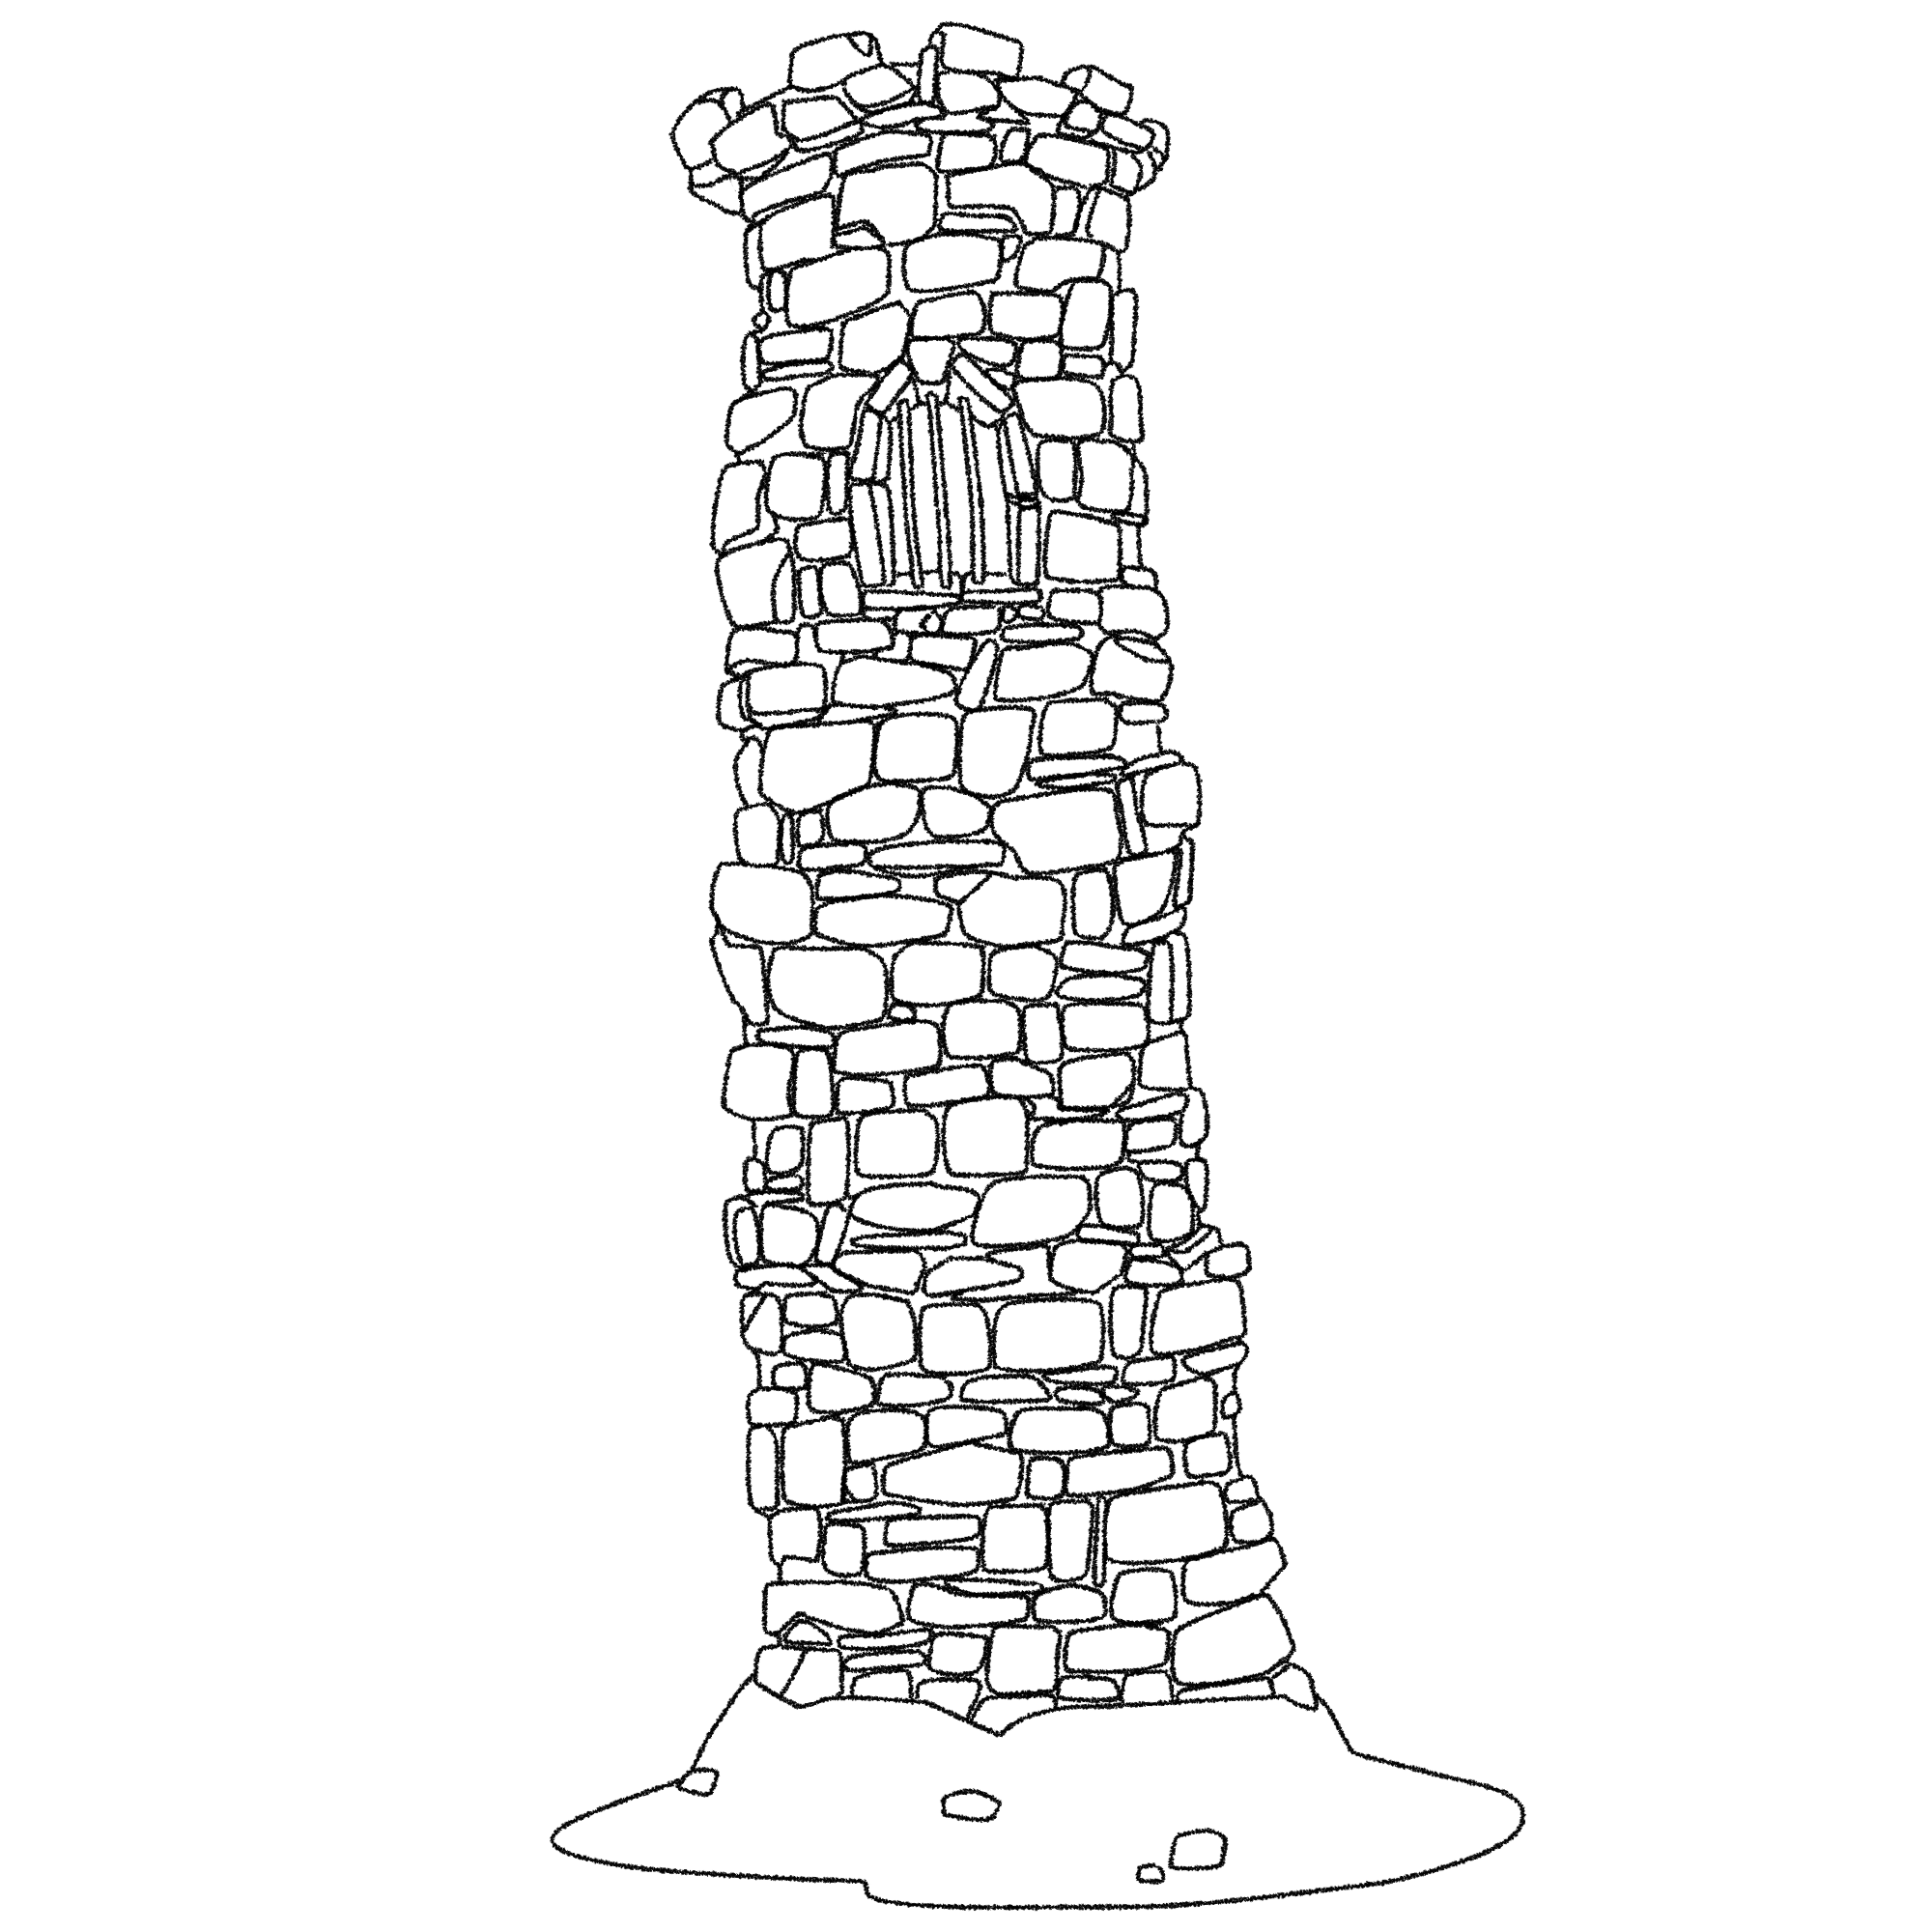 A Tower colouring outline